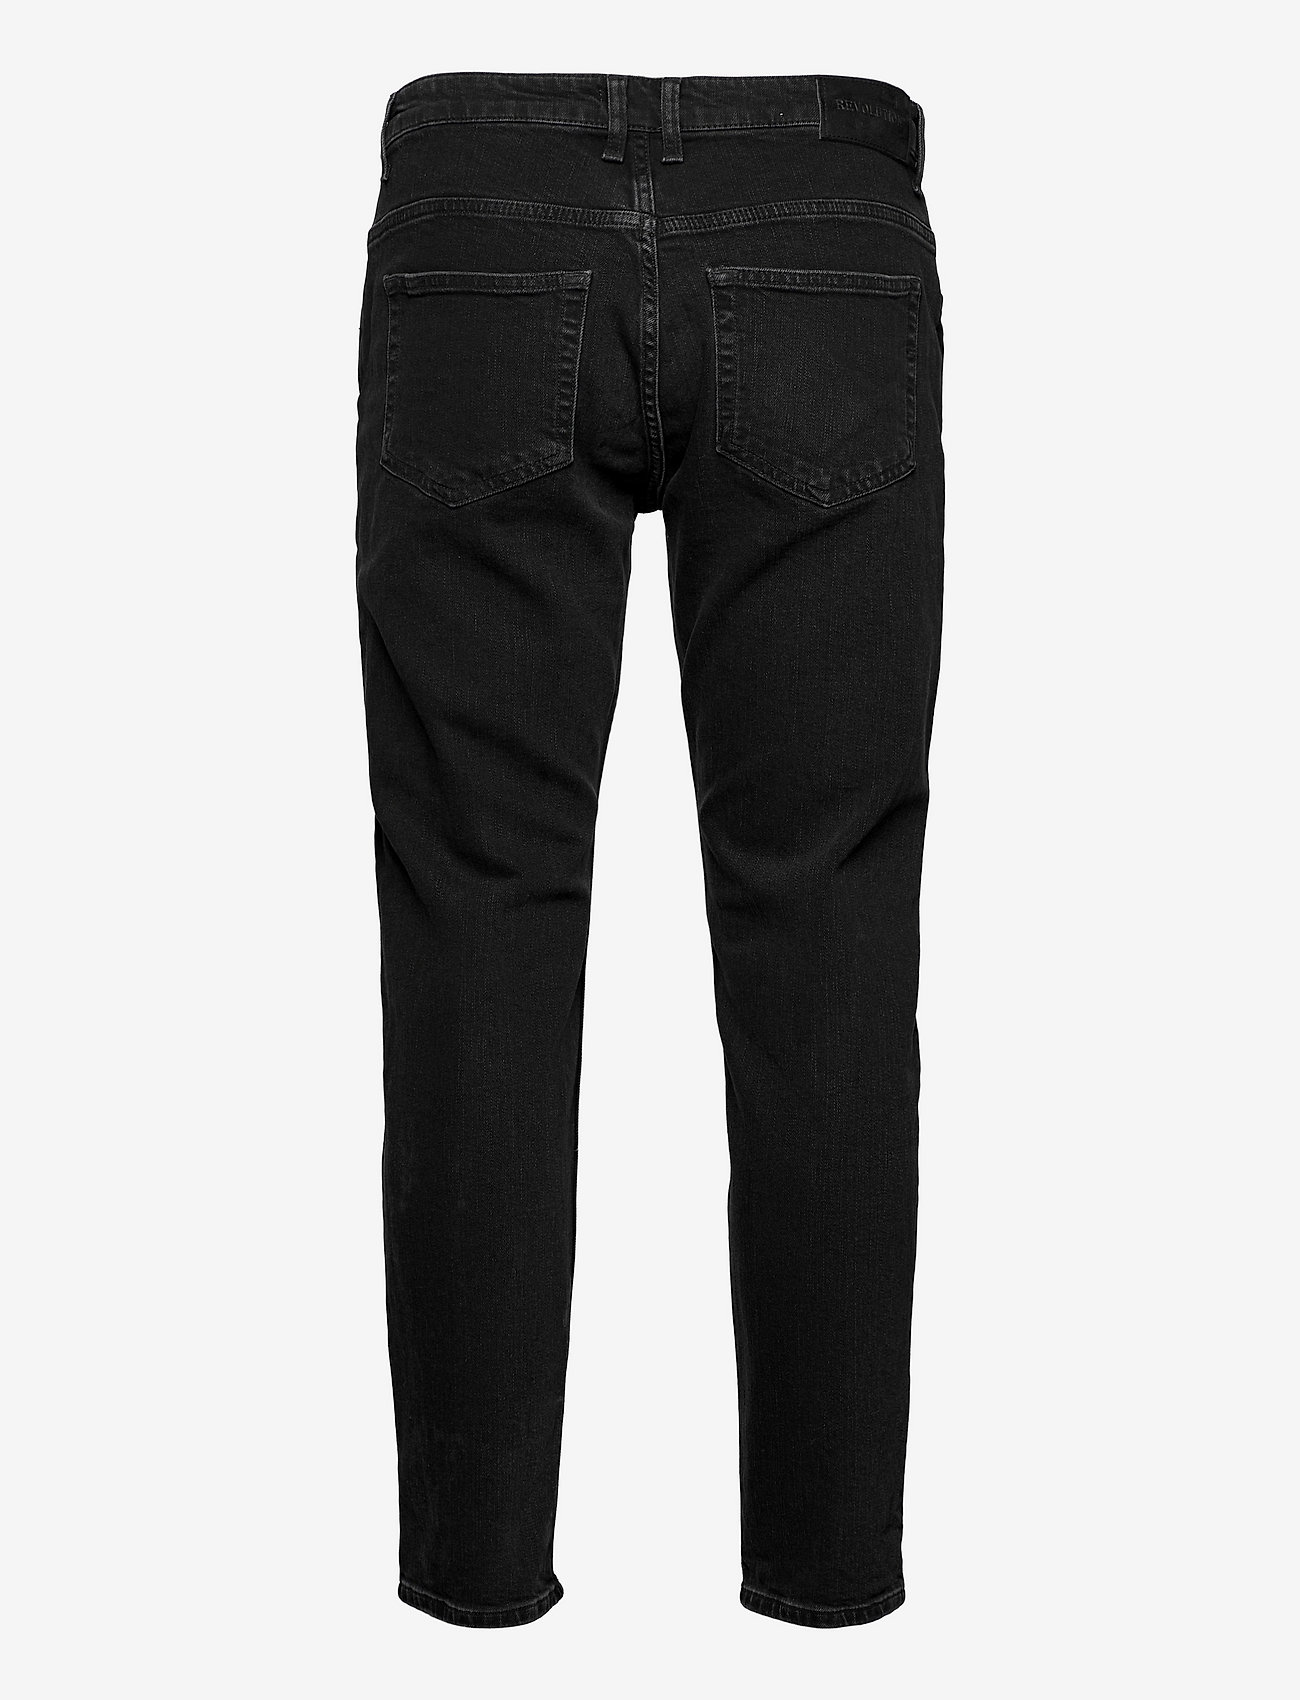 Revolution - Rinsed black loose jeans - relaxed jeans - black - 1